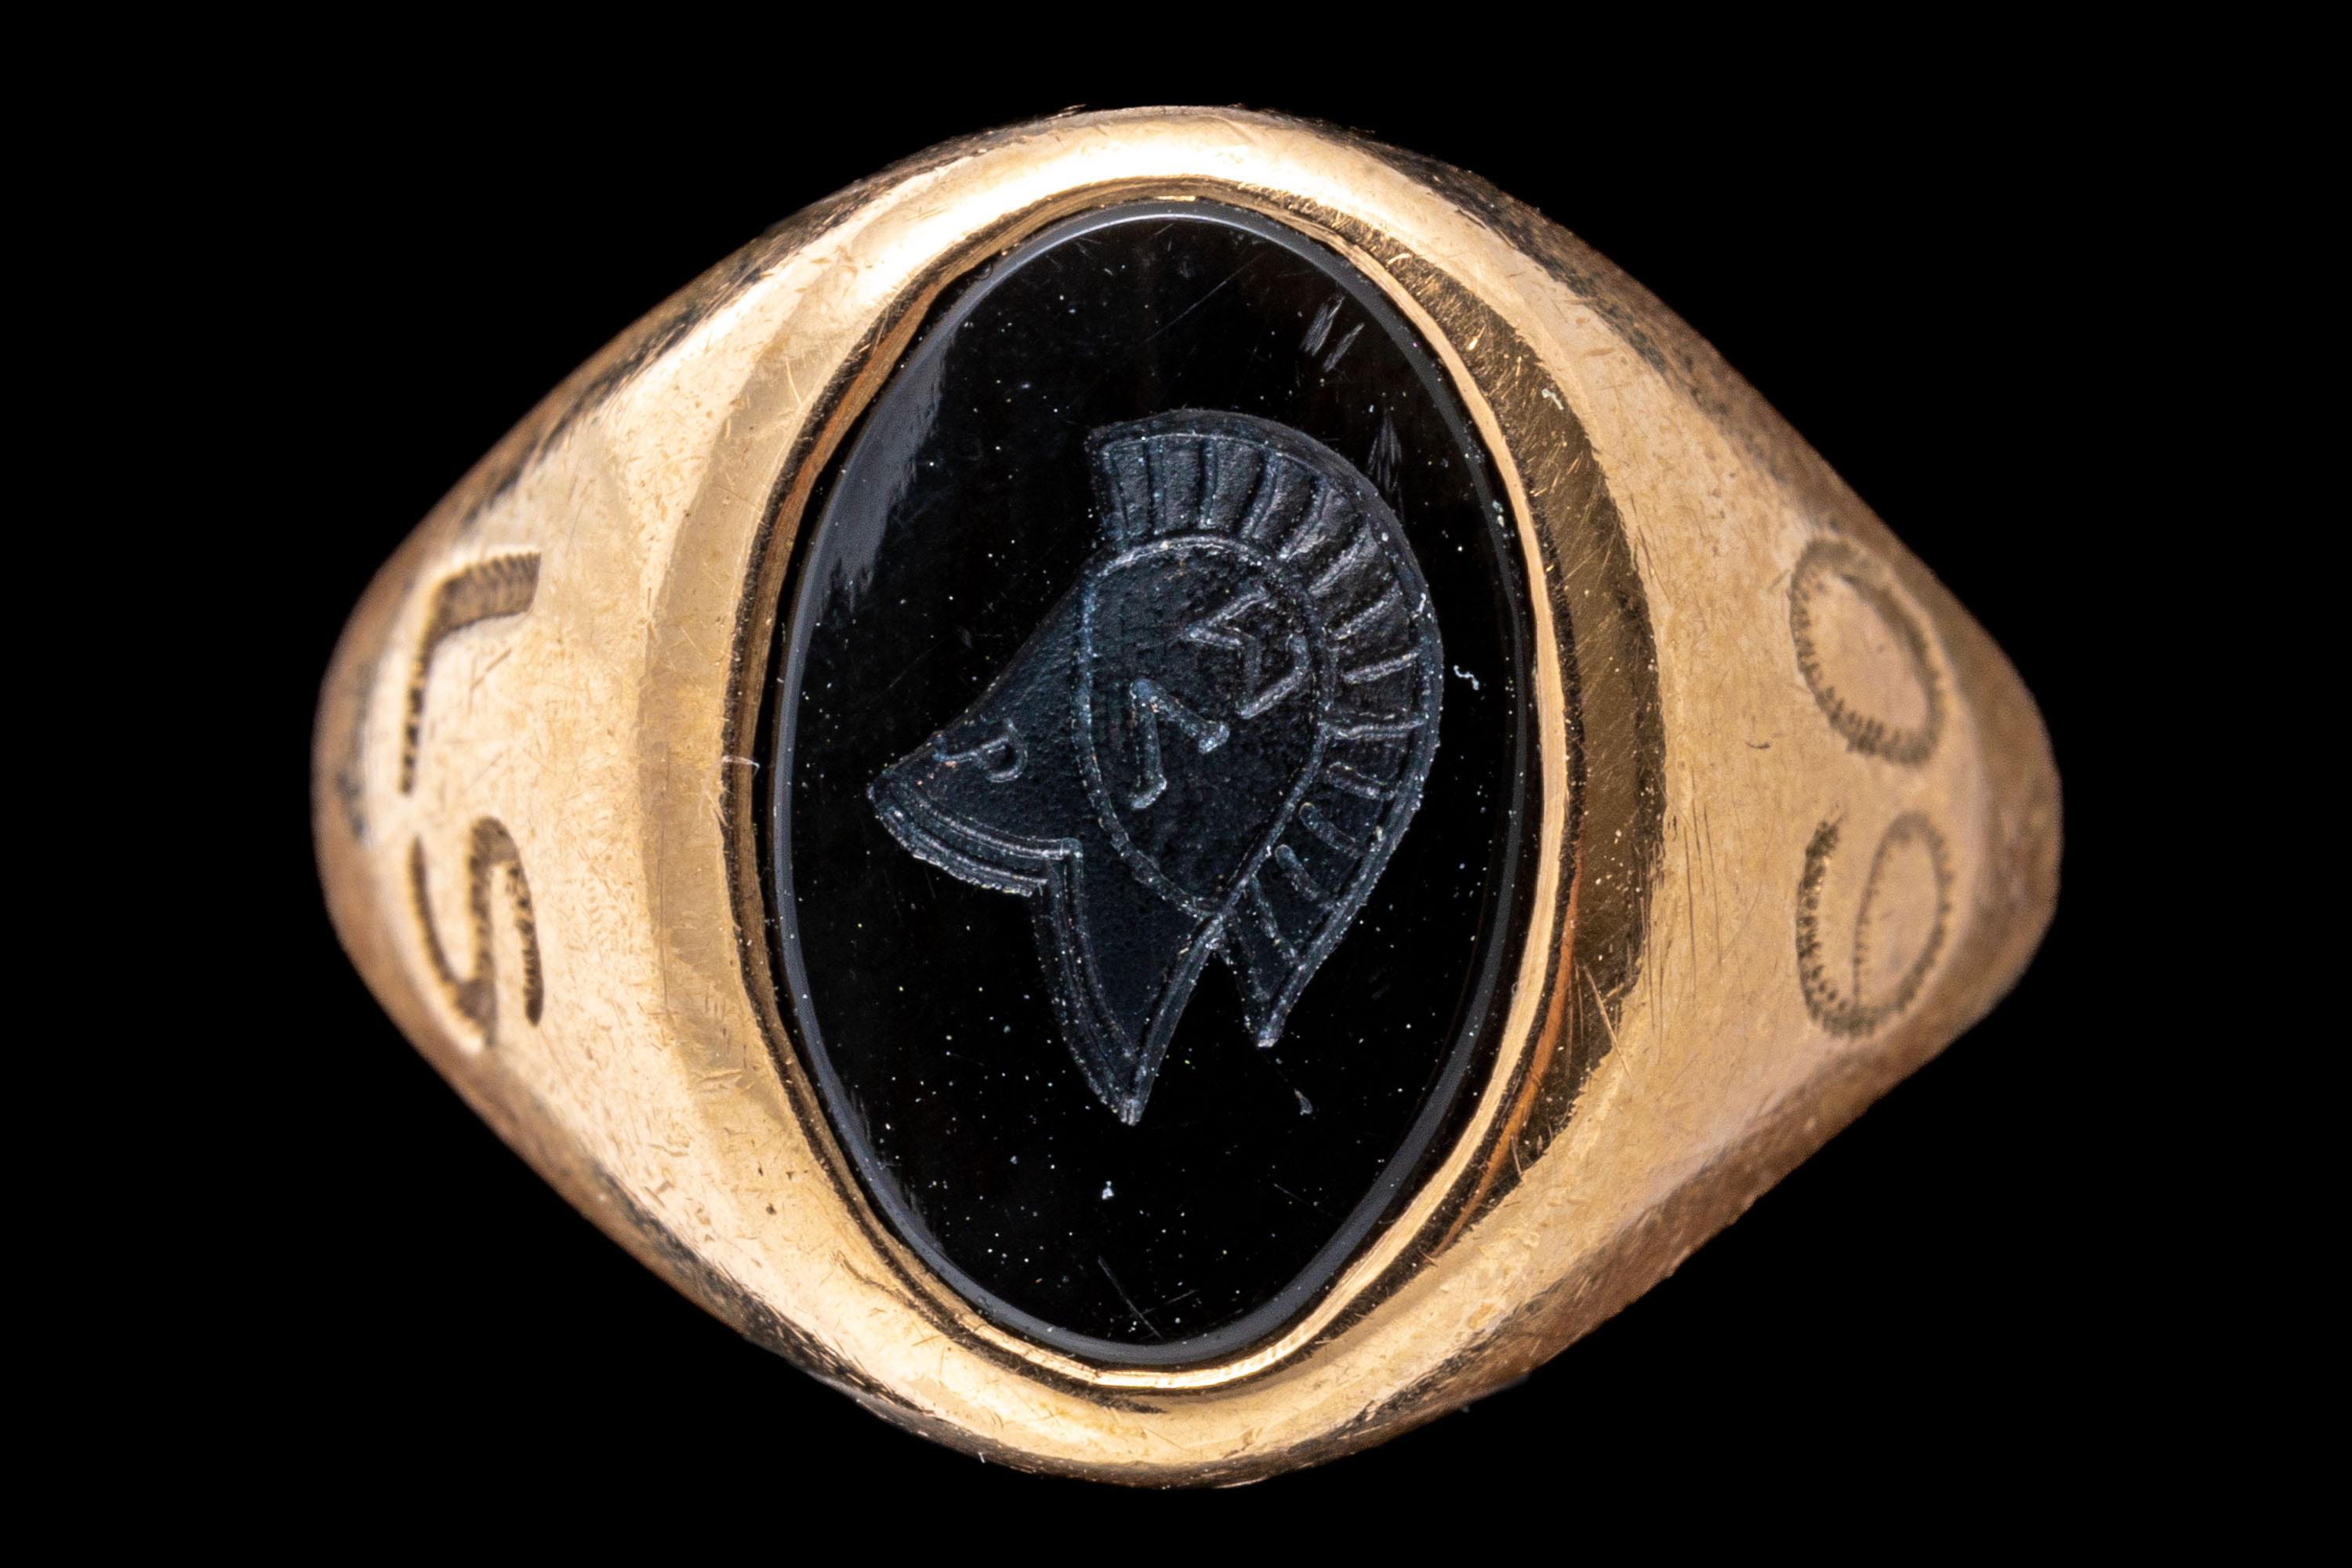 10k gold ring. This handsome vintage signet style class ring features a center, oval black onyx, decorated with an intaglio logo engraving and adorned with wide, simple high polished sides, engraved.
Marks: 10k
Dimensions: 5/16